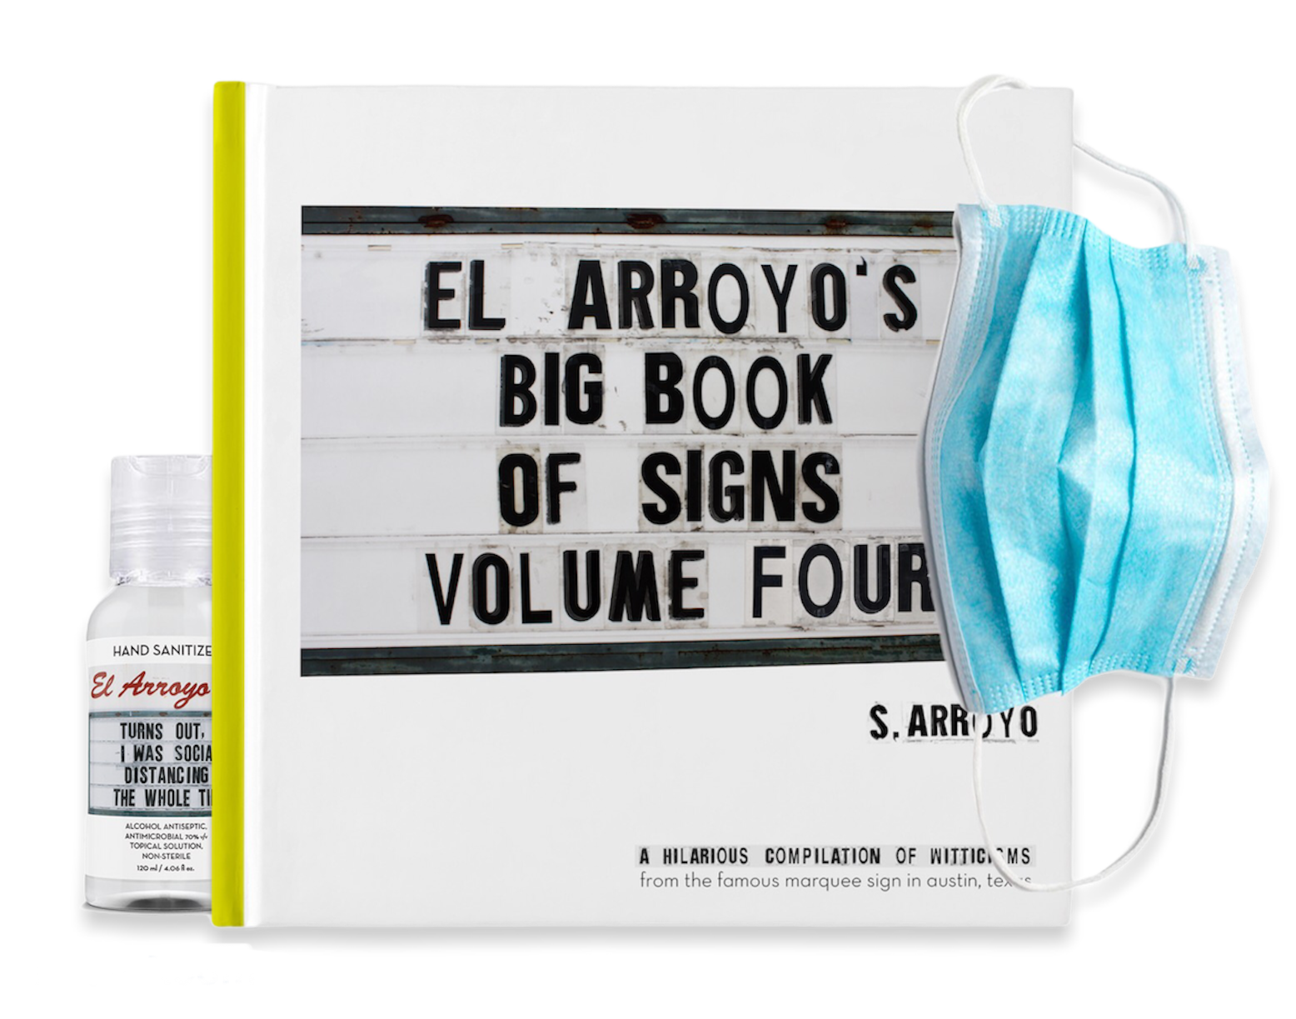 Big Book of Signs Vol Four